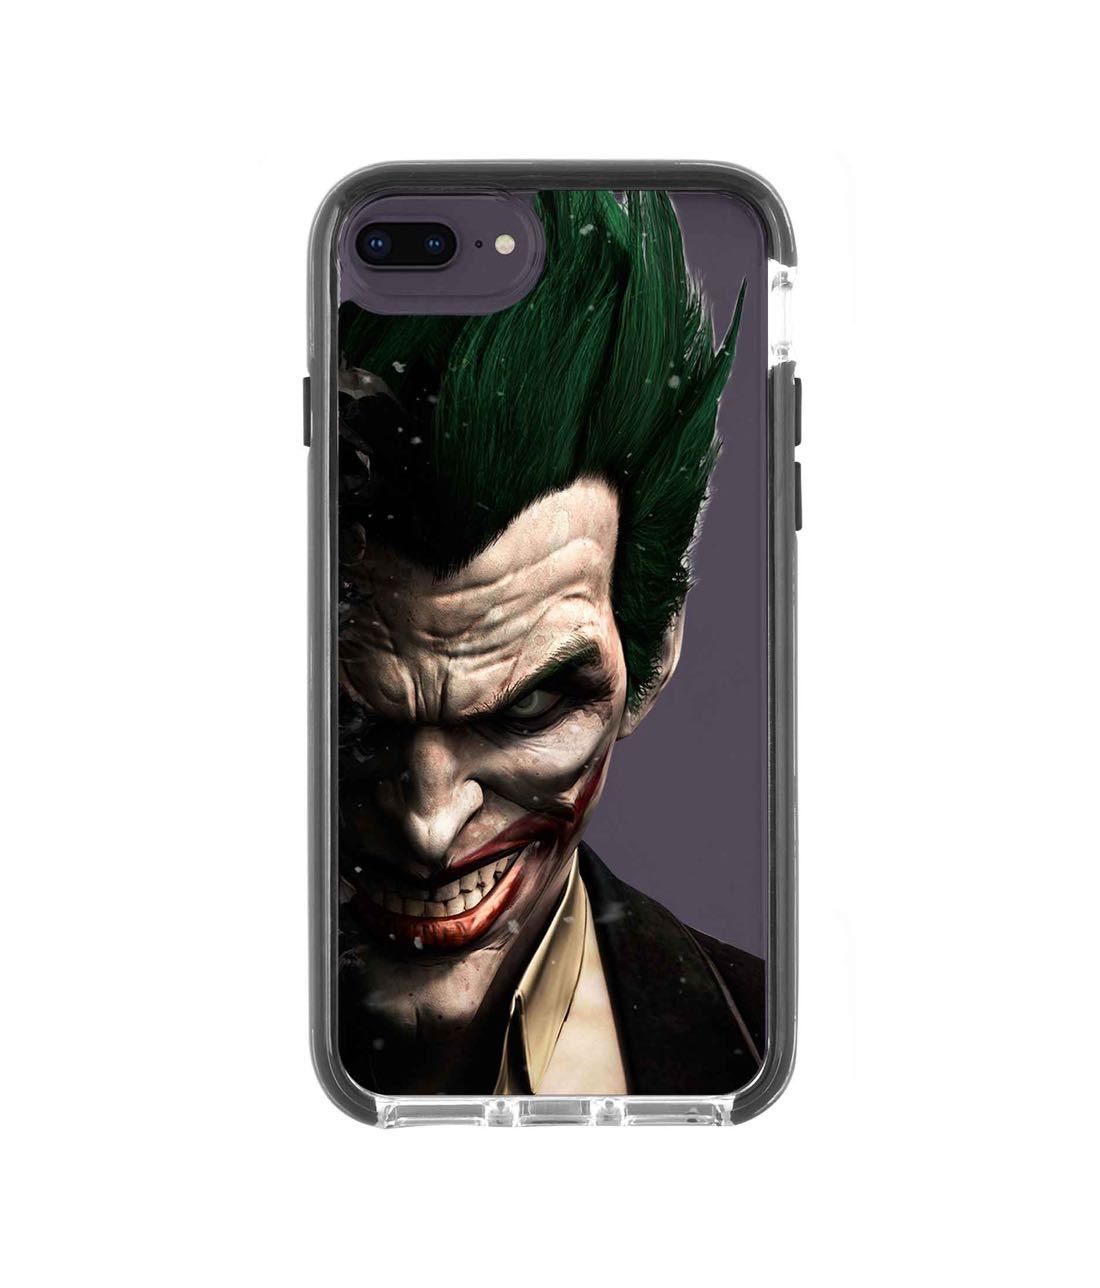 Joker Withers - Extreme Phone Case for iPhone 8 Plus